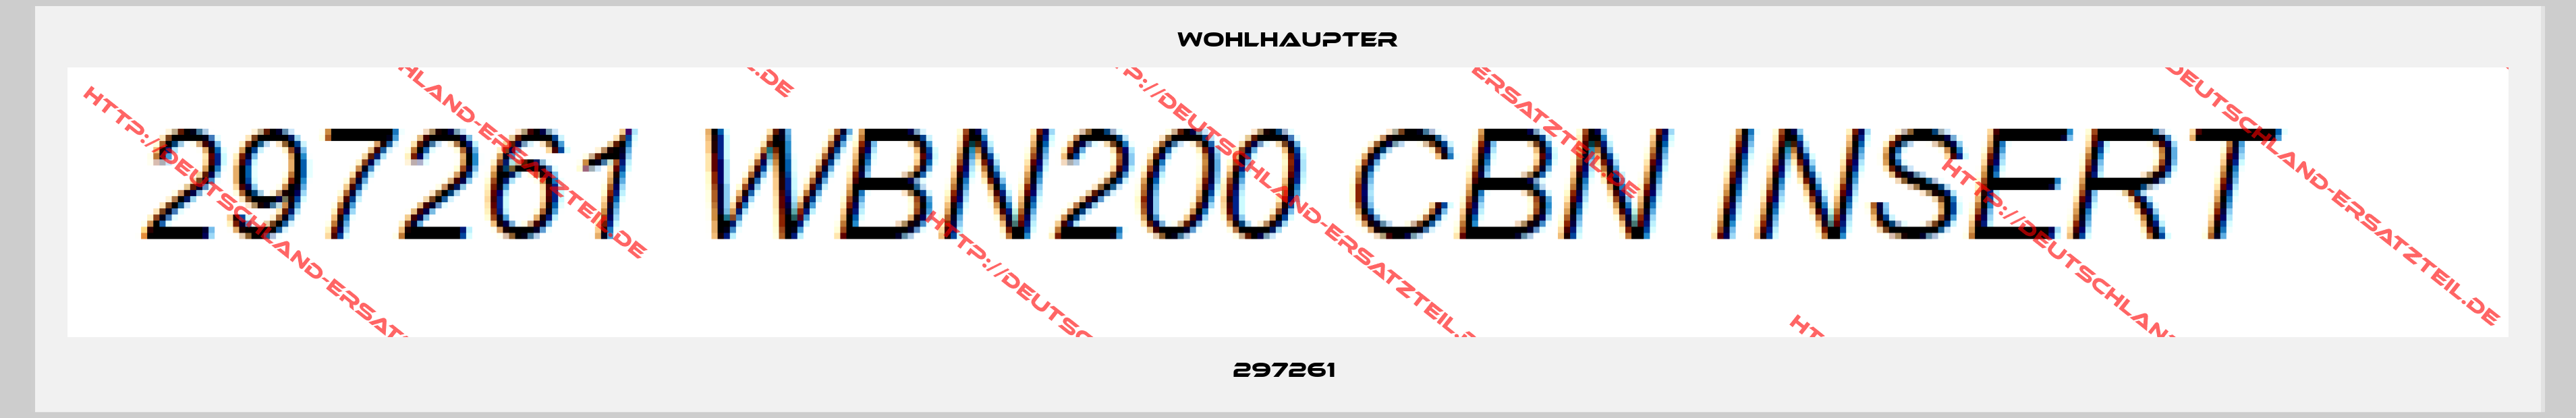 Wohlhaupter-297261 